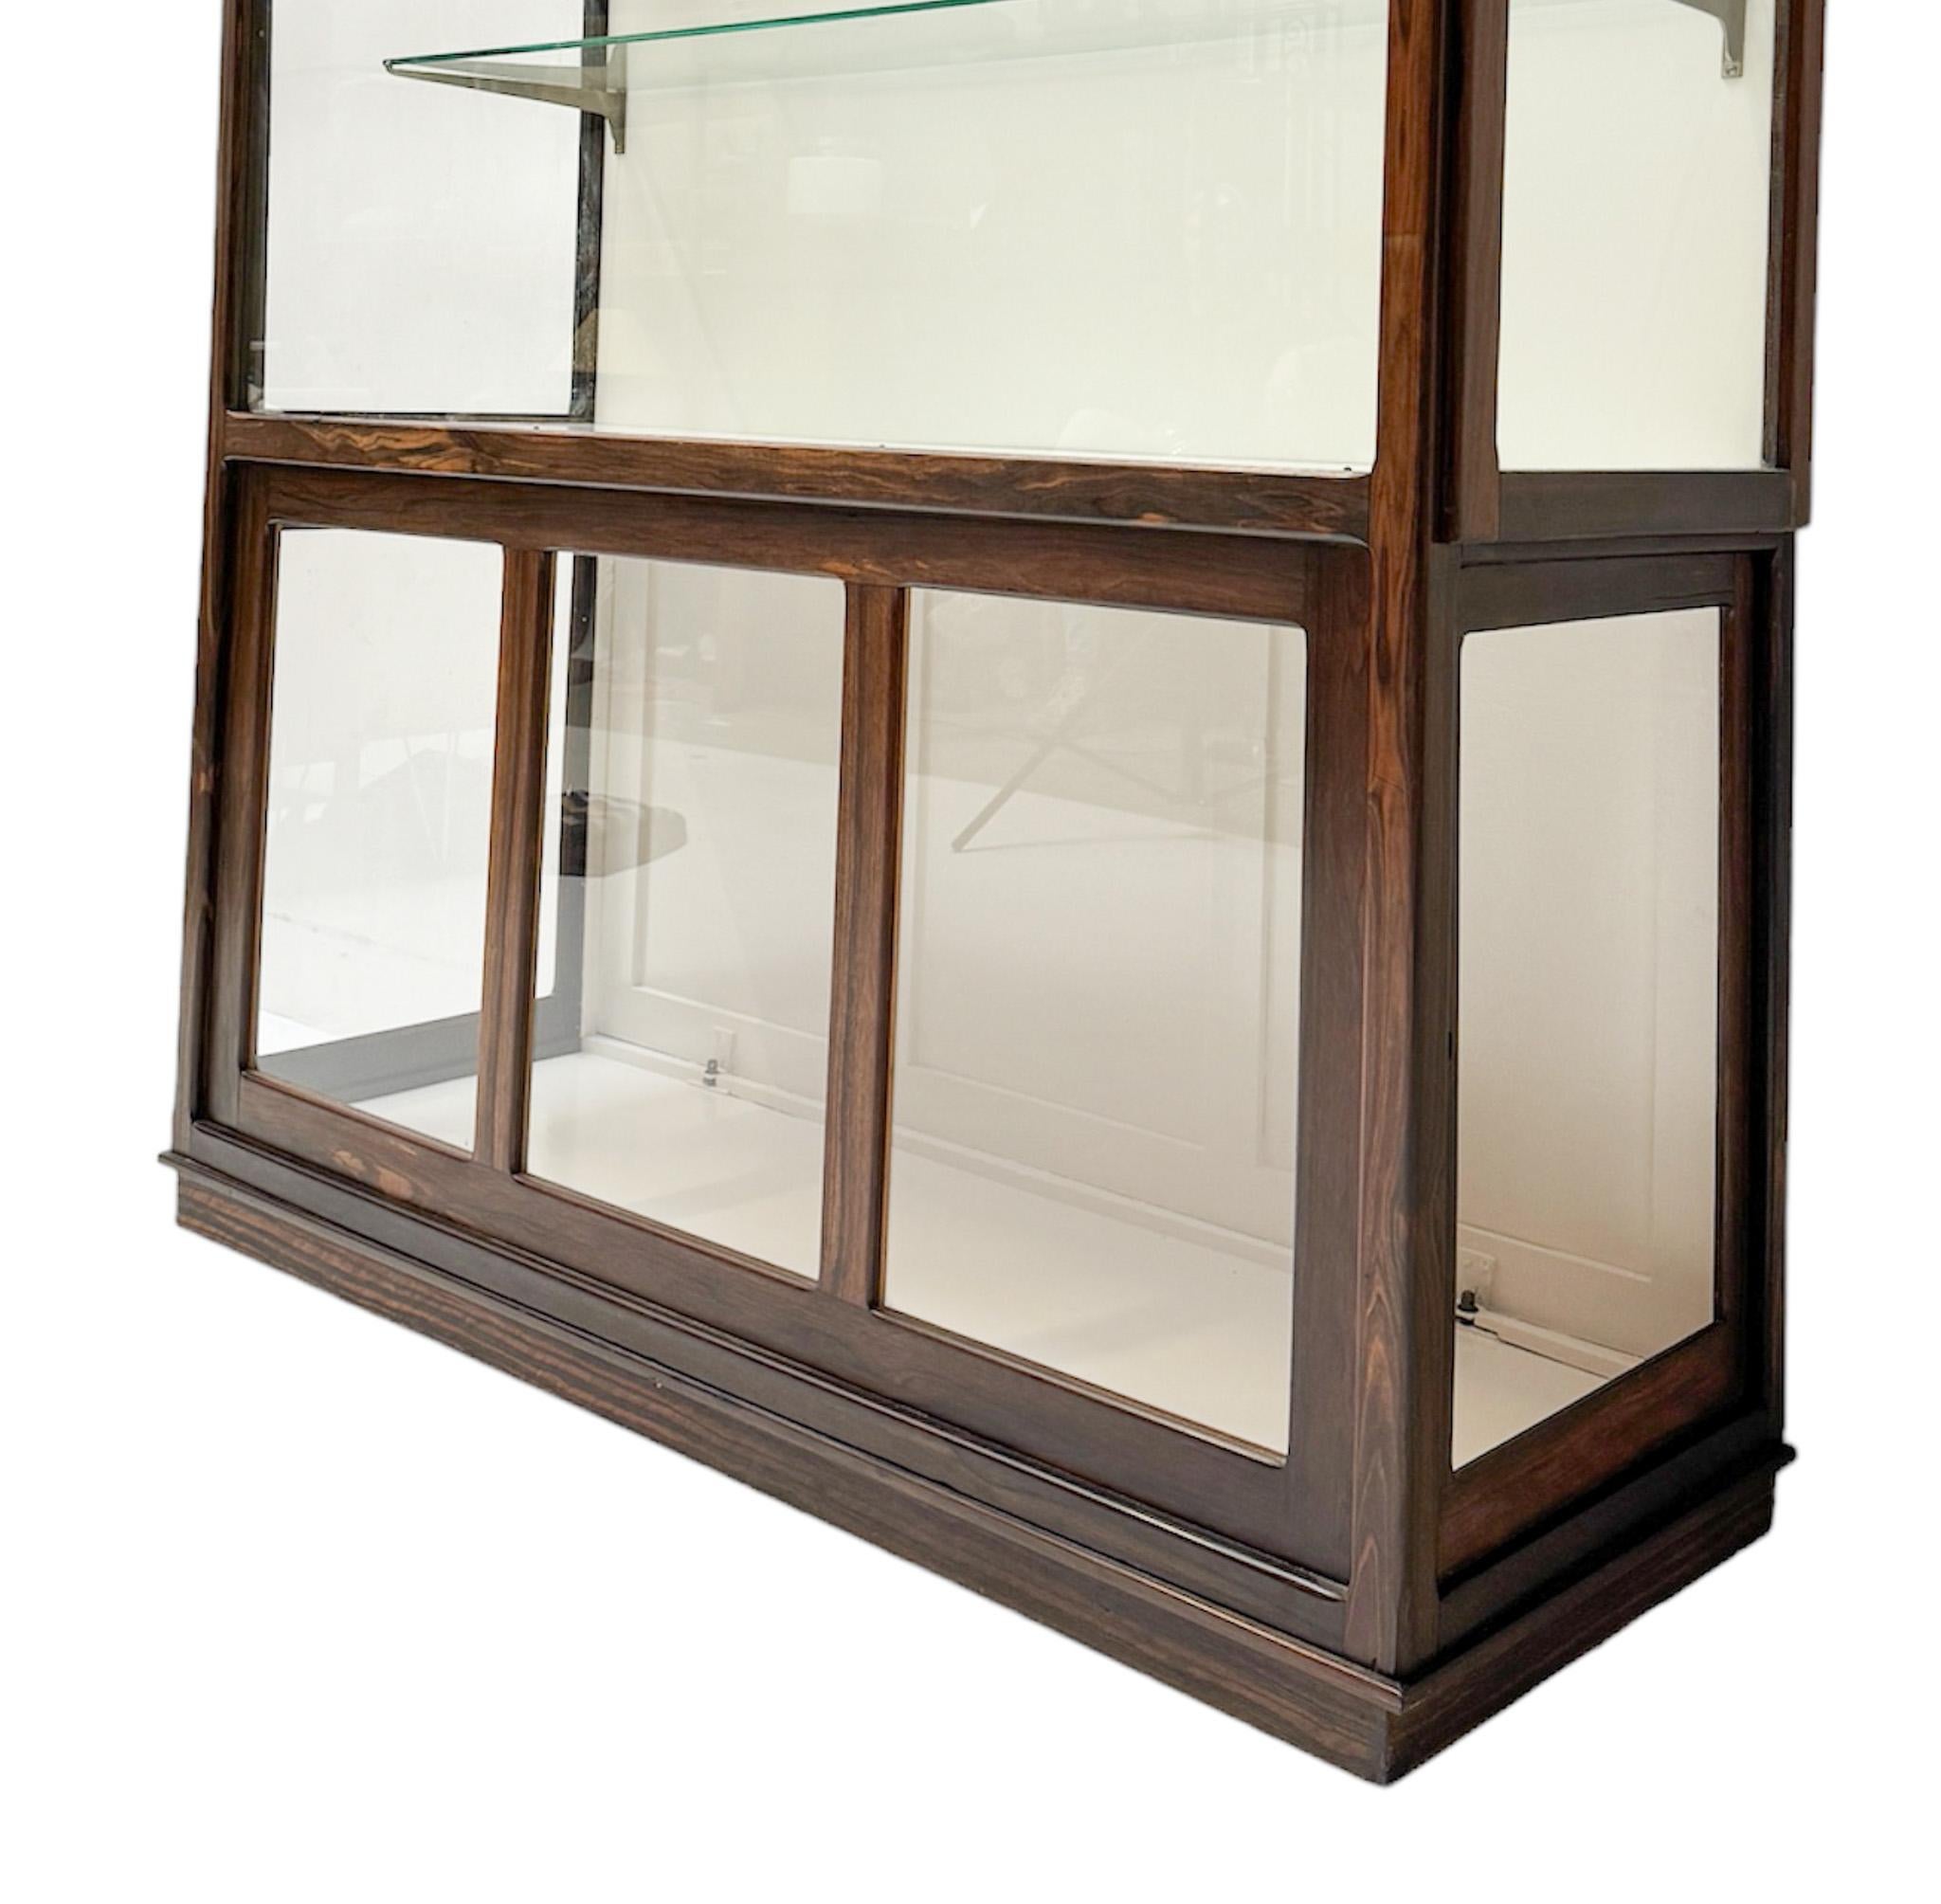 Macassar Art Deco Amsterdamse School Display Cabinet by Napoleon Le Grand, 1920s For Sale 3